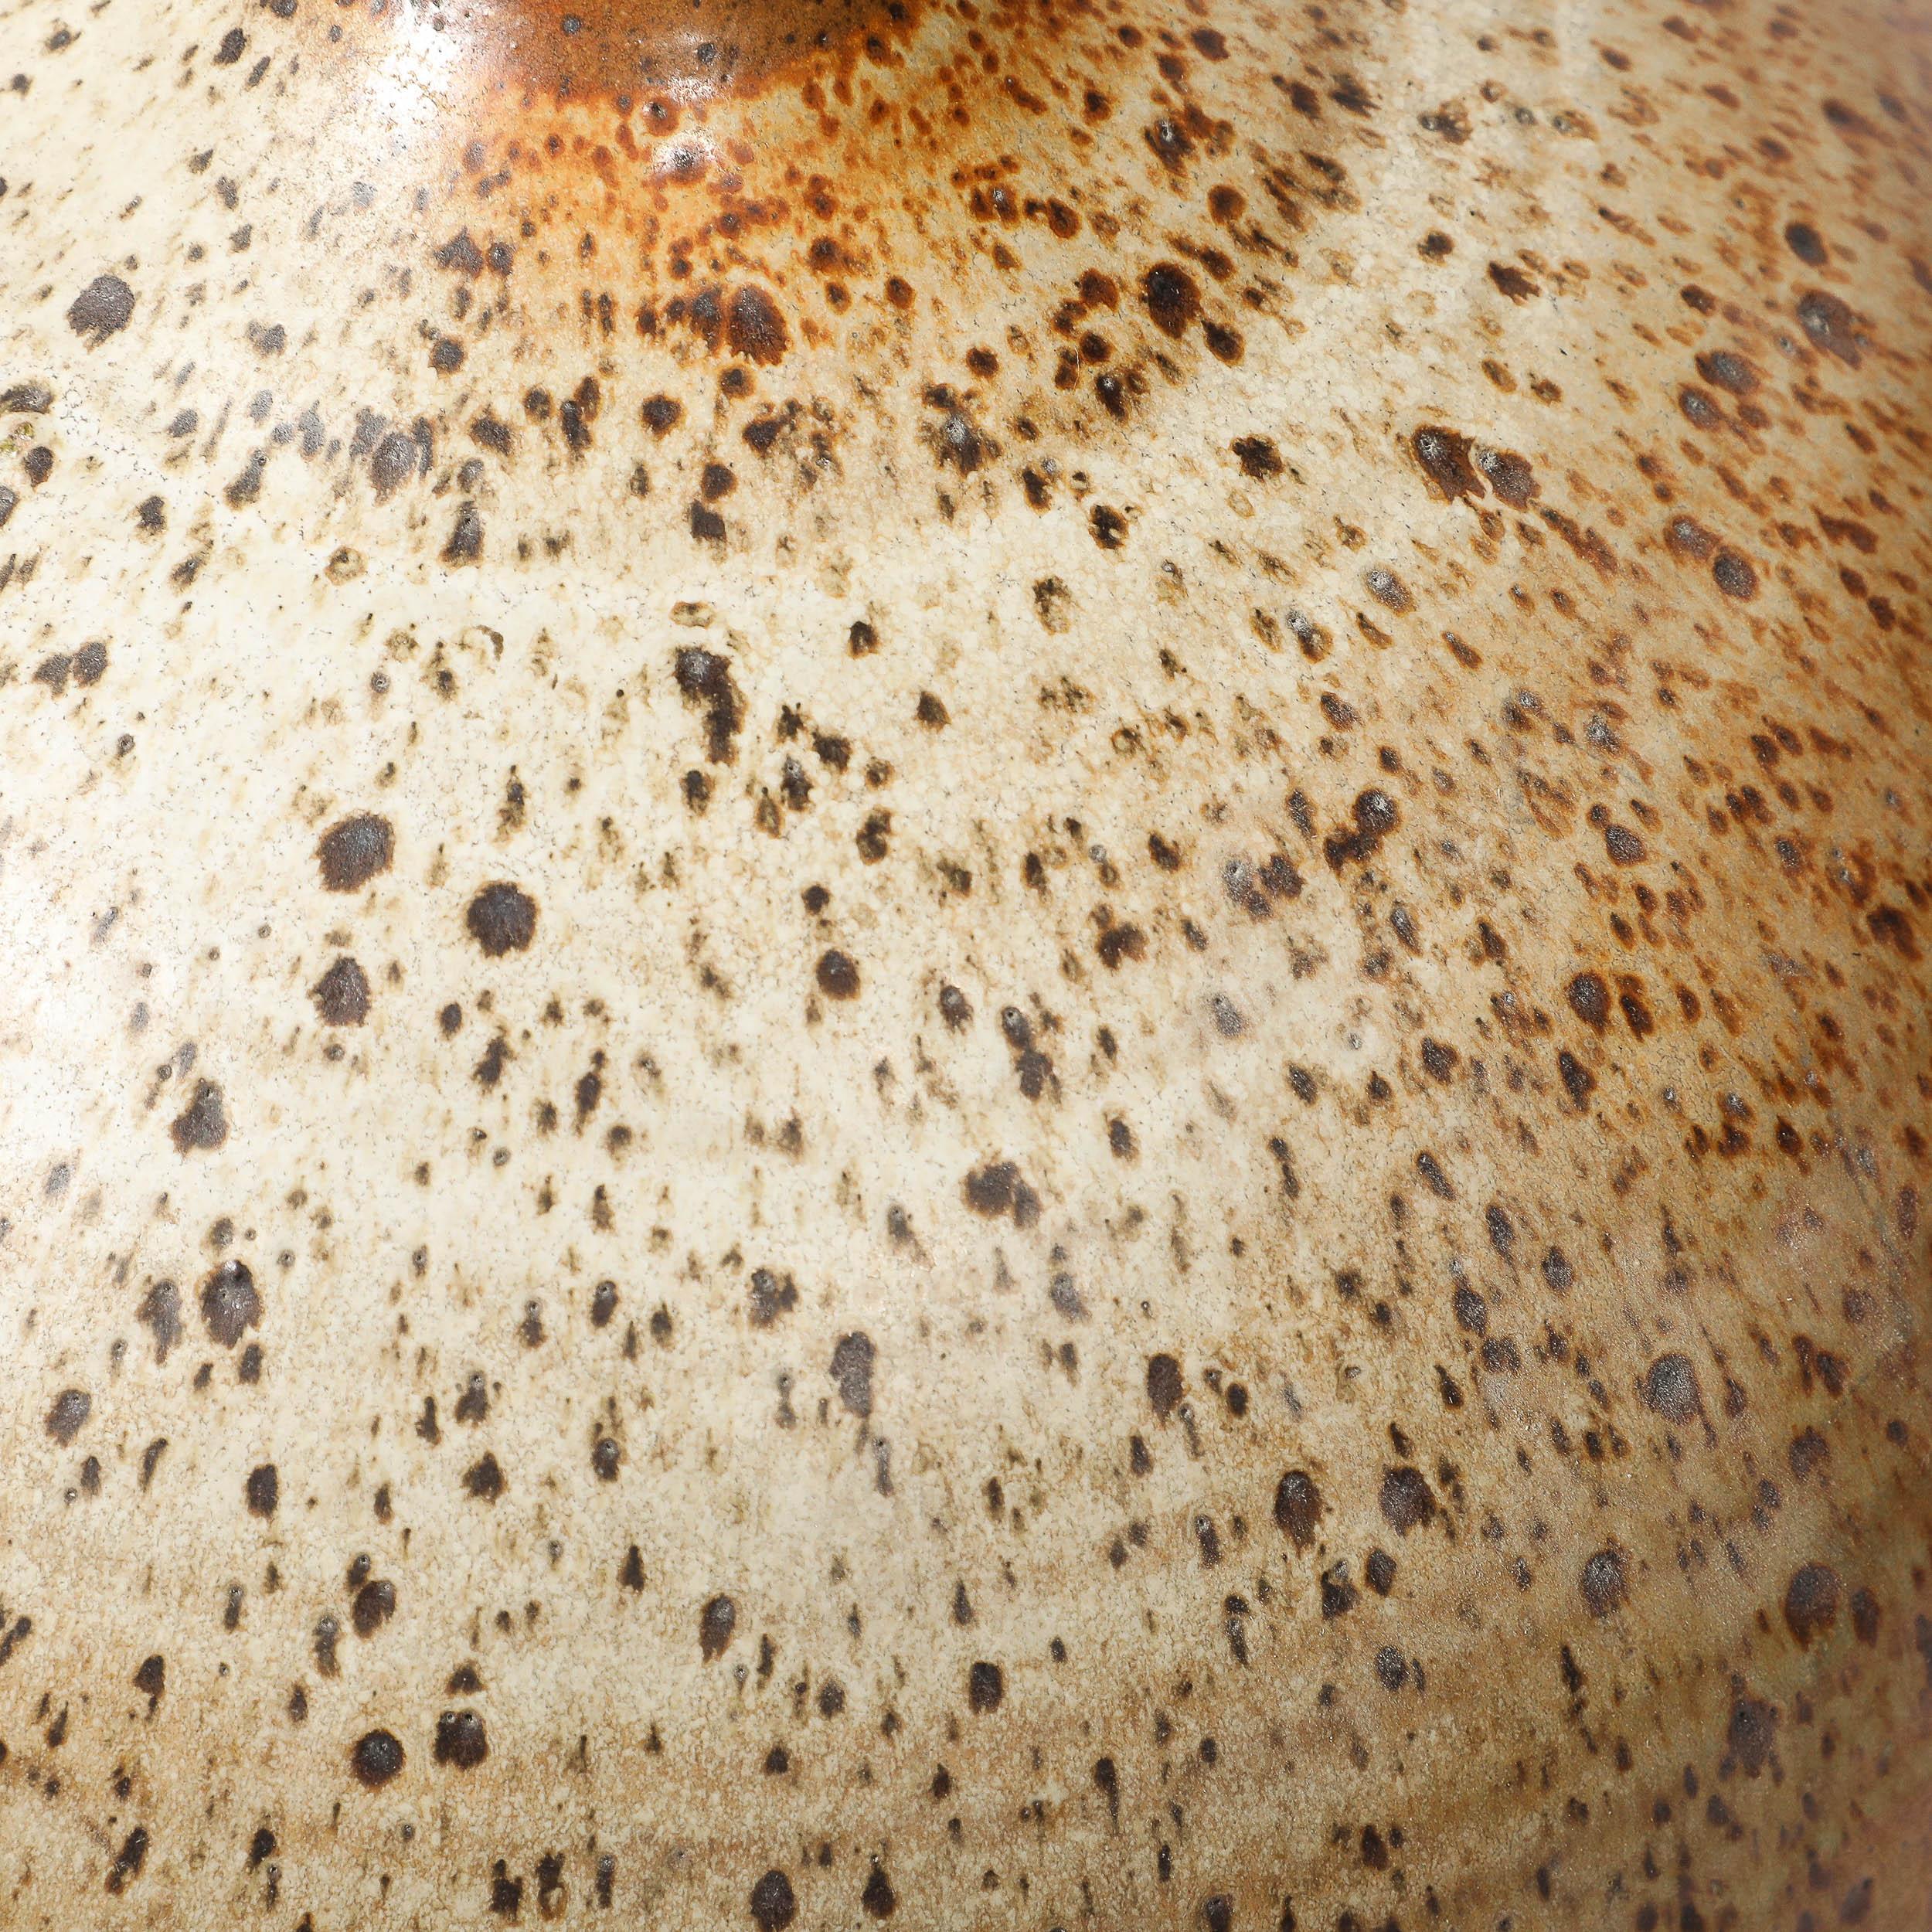 American Mid-Century Modernist Round Speckled Earth Tone Ceramic Vase w/ Tapered Neck For Sale